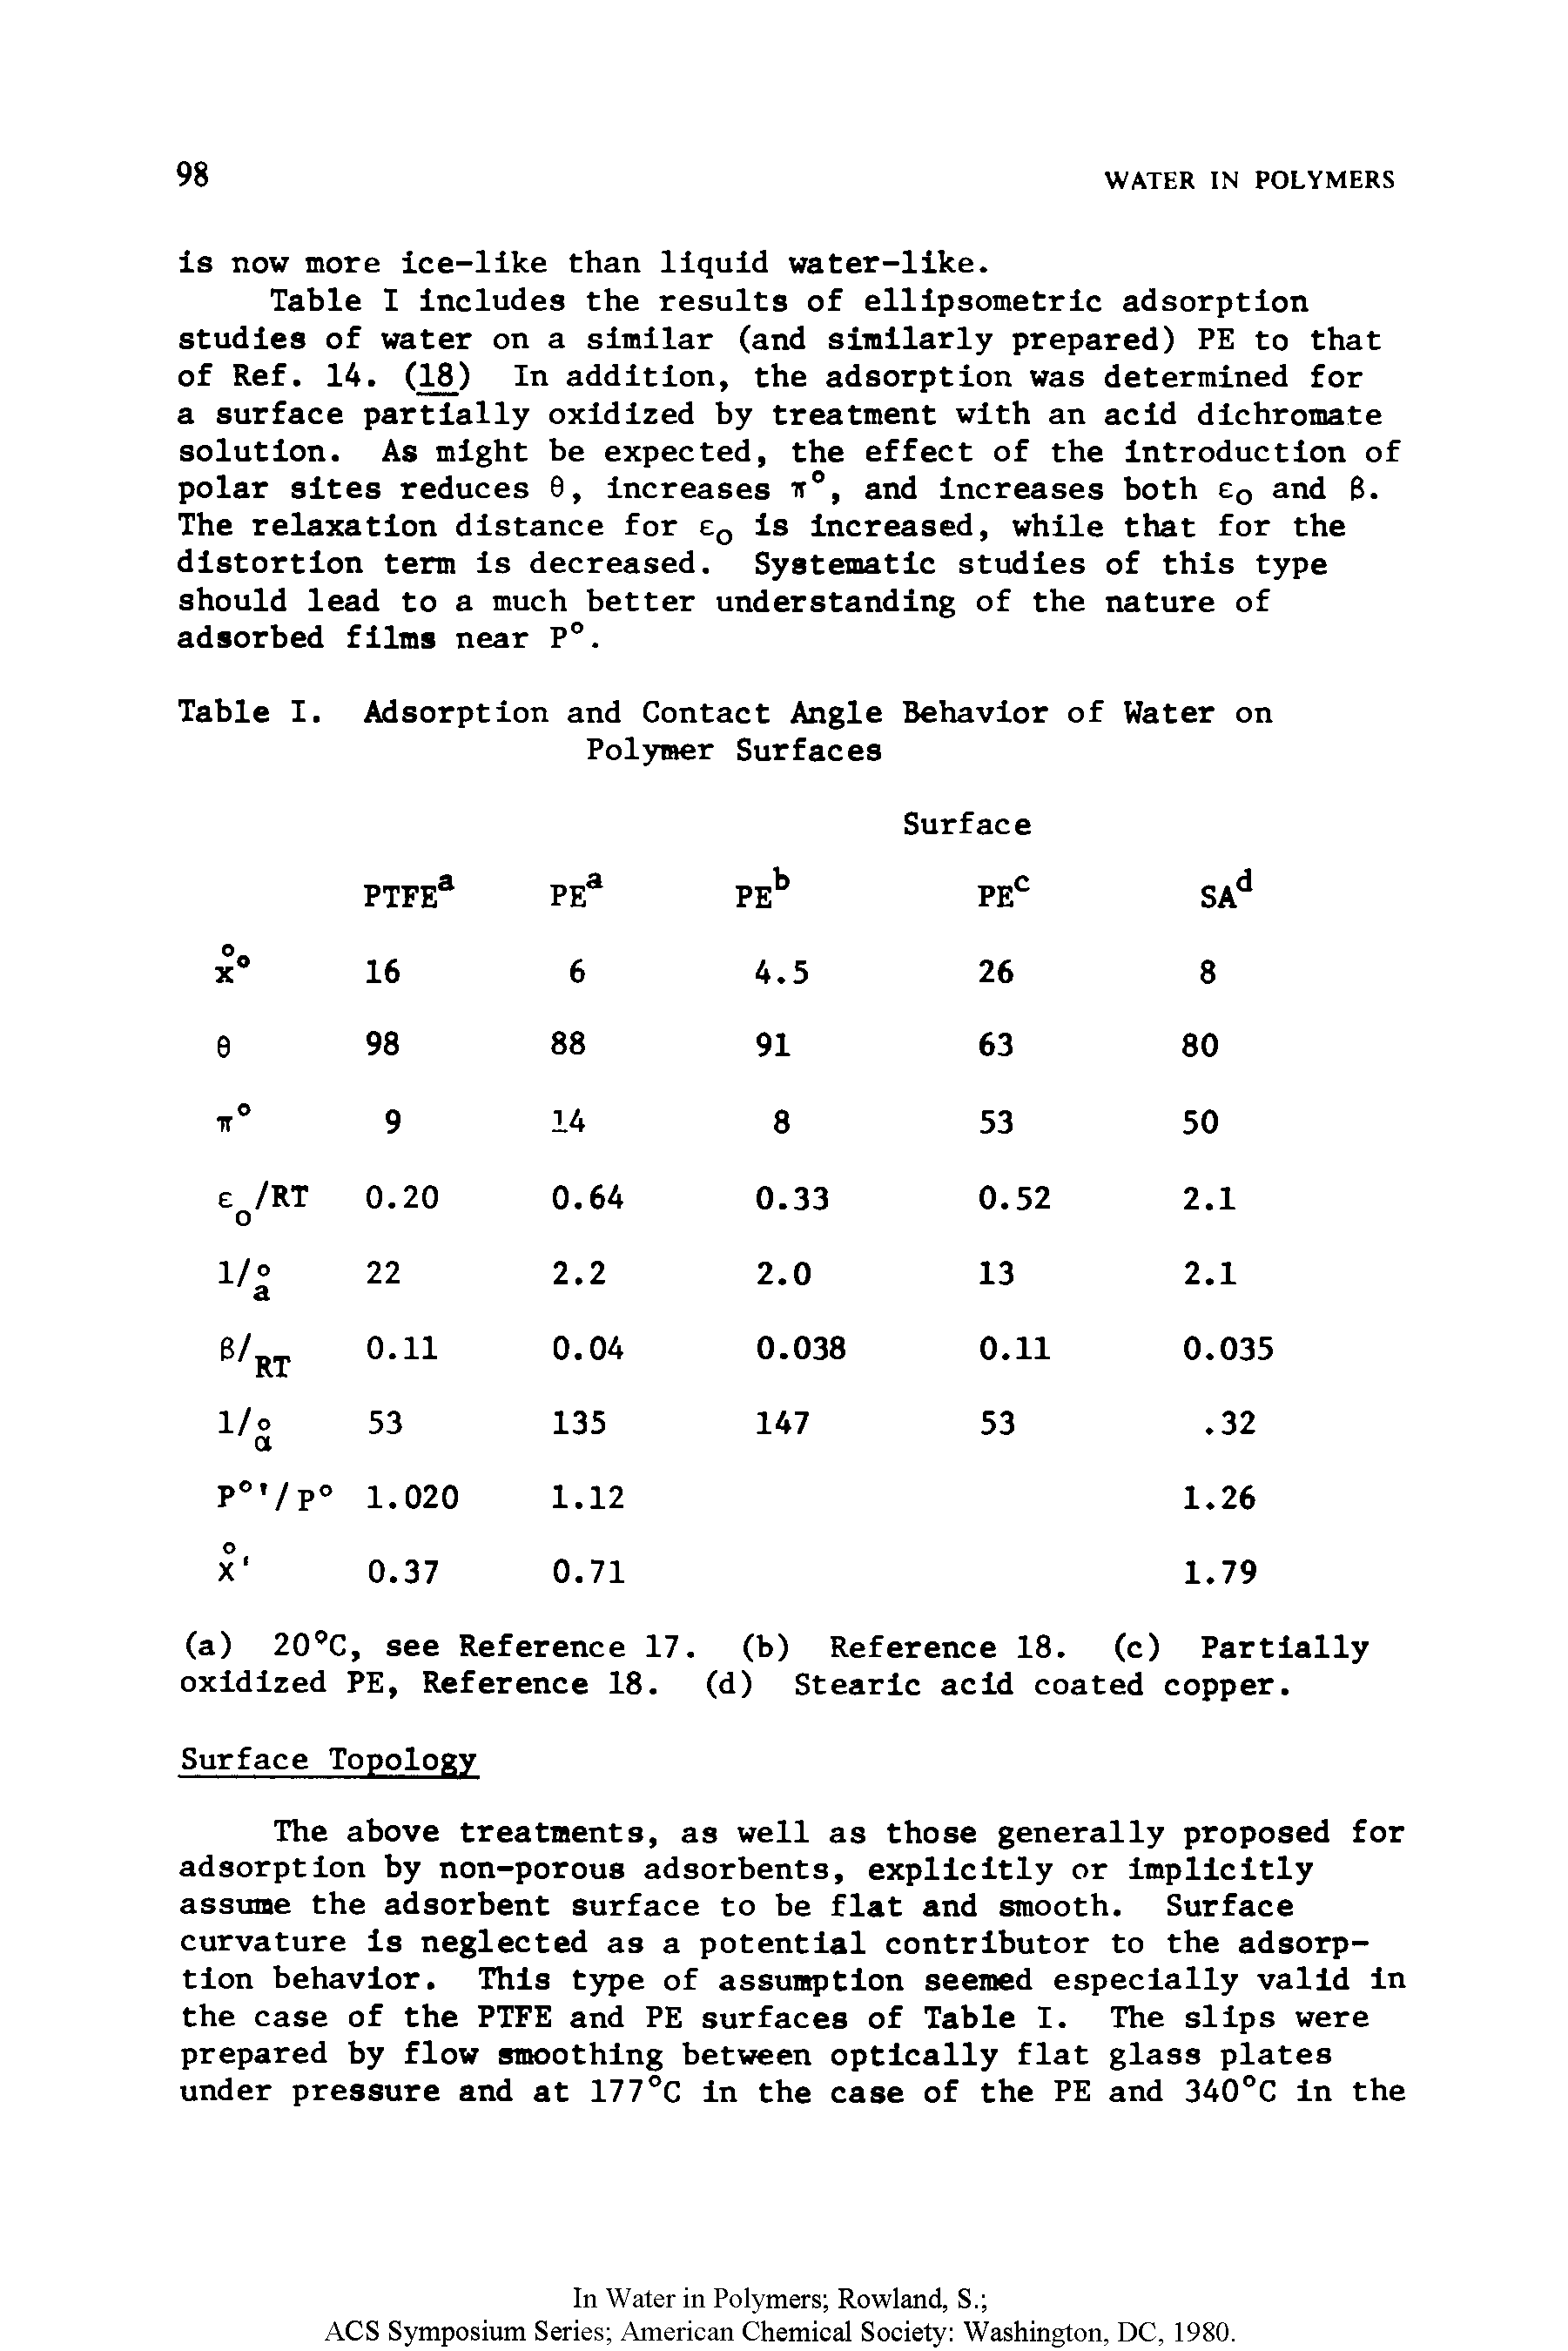 Table I Includes the results of ellipsometric adsorption studies of water on a similar (and similarly prepared) PE to that of Ref. 14. (18) In addition, the adsorption was determined for a surface partially oxidized by treatment with an acid dlchromate solution. As might be expected, the effect of the introduction of polar sites reduces 6, Increases and Increases both Cq nd B. The relaxation distance for Is Increased, while that for the distortion term Is decreased. Systematic studies of this type should lead to a much better understanding of the nature of adsorbed films near F°.